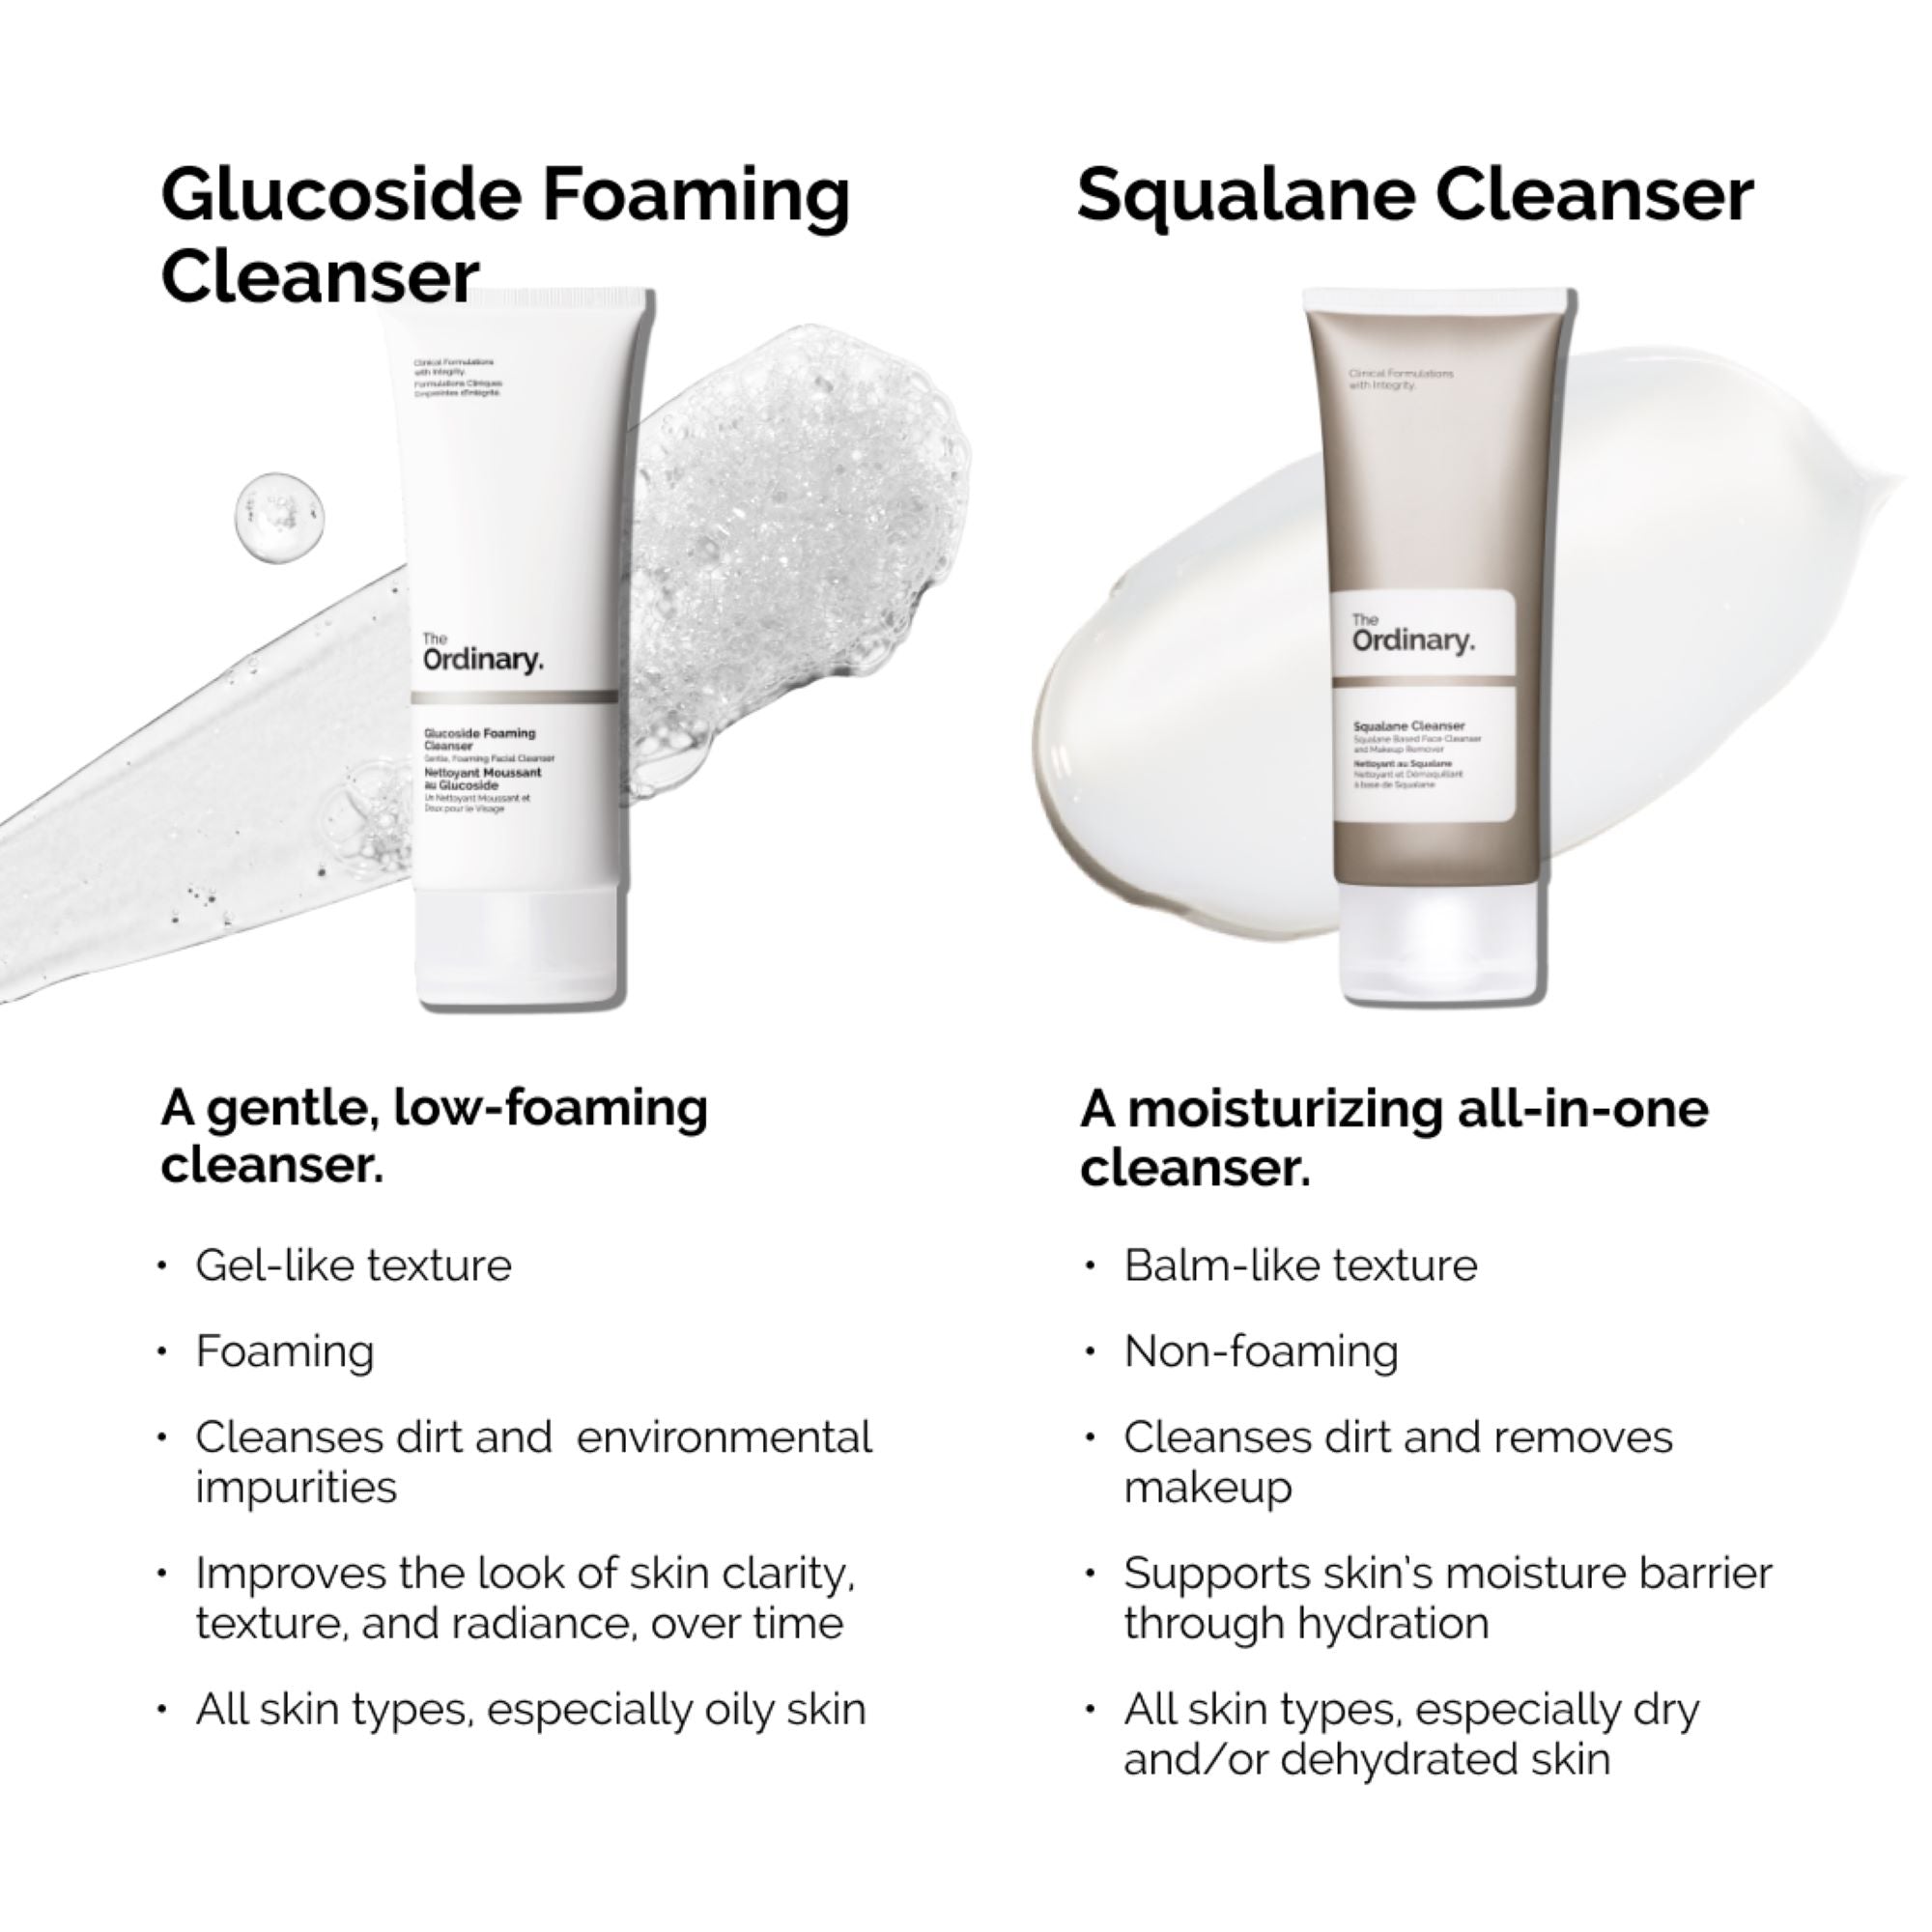 THE ORDINARY GLUCOSIDE FOAMING CLEANSER